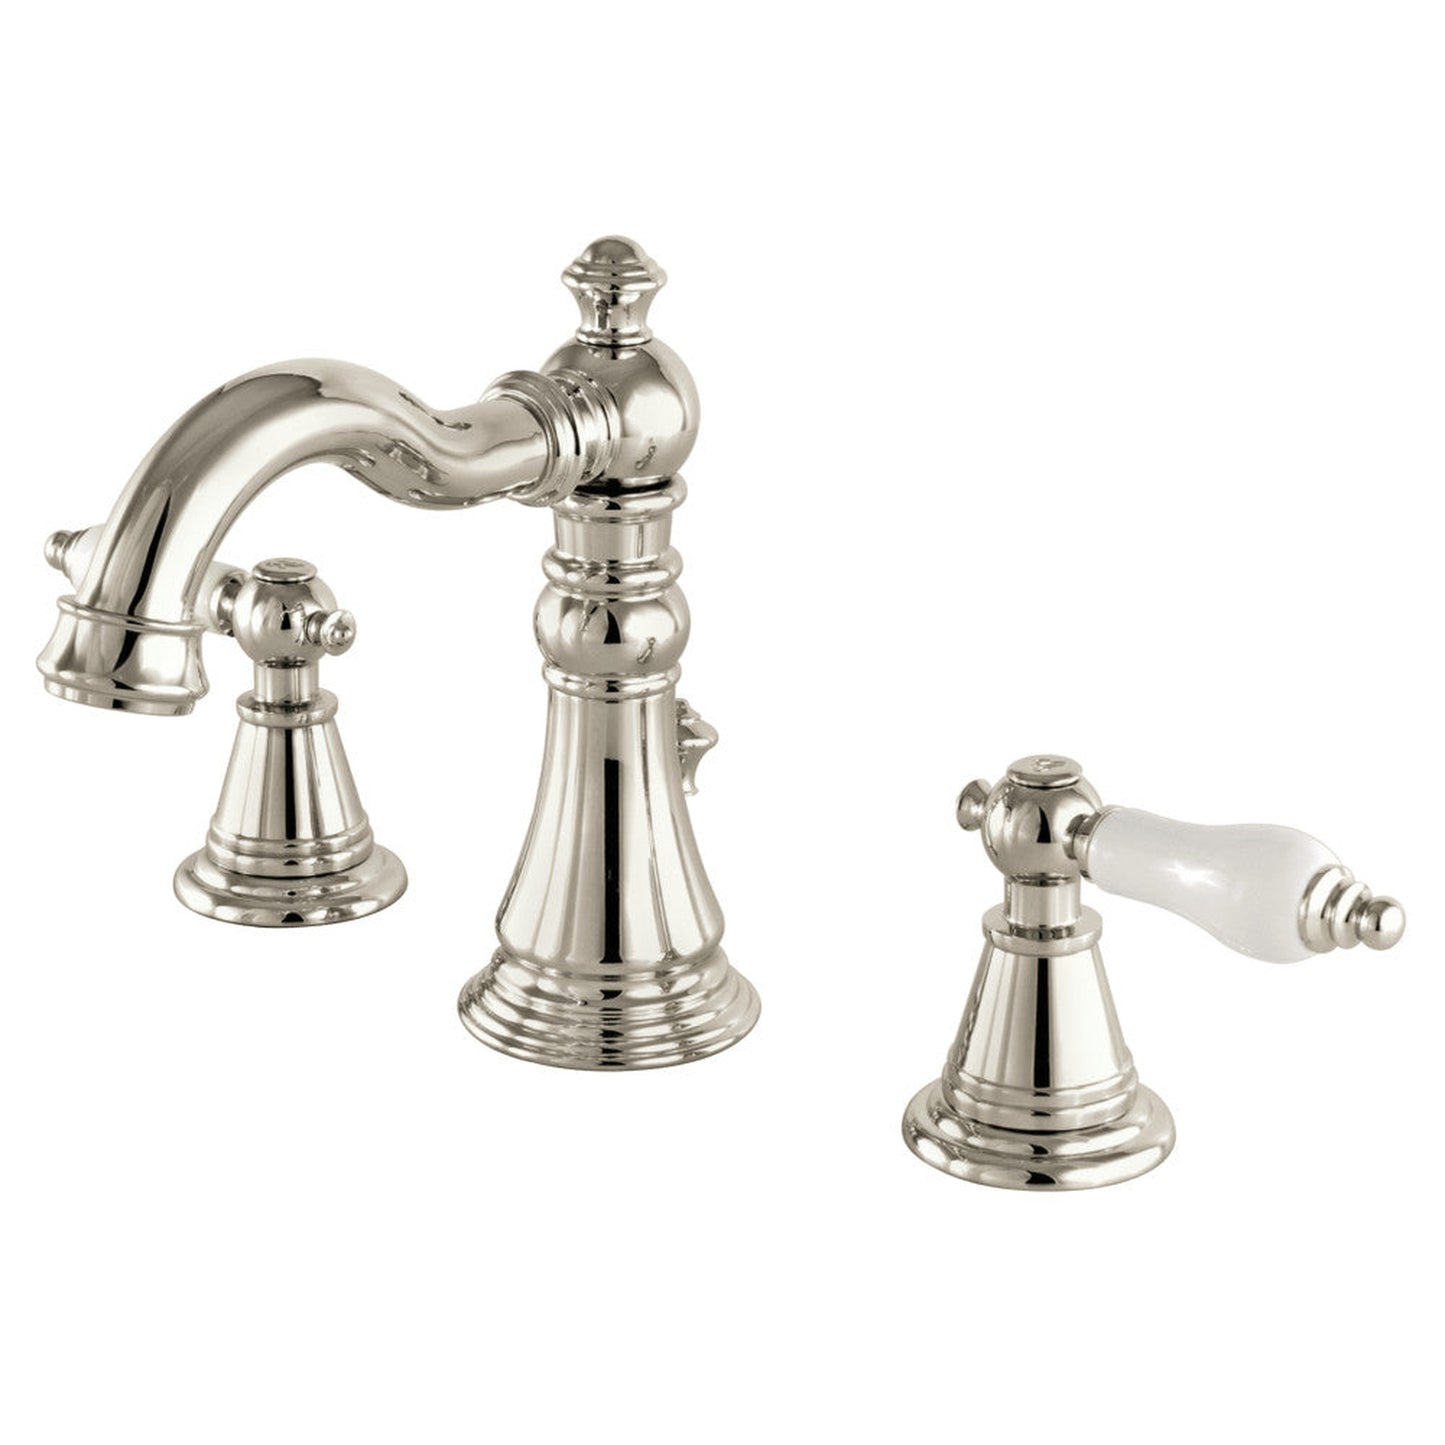 Fauceture FSC1979PL English Classic Widespread Bathroom Faucet, Polished Nickel